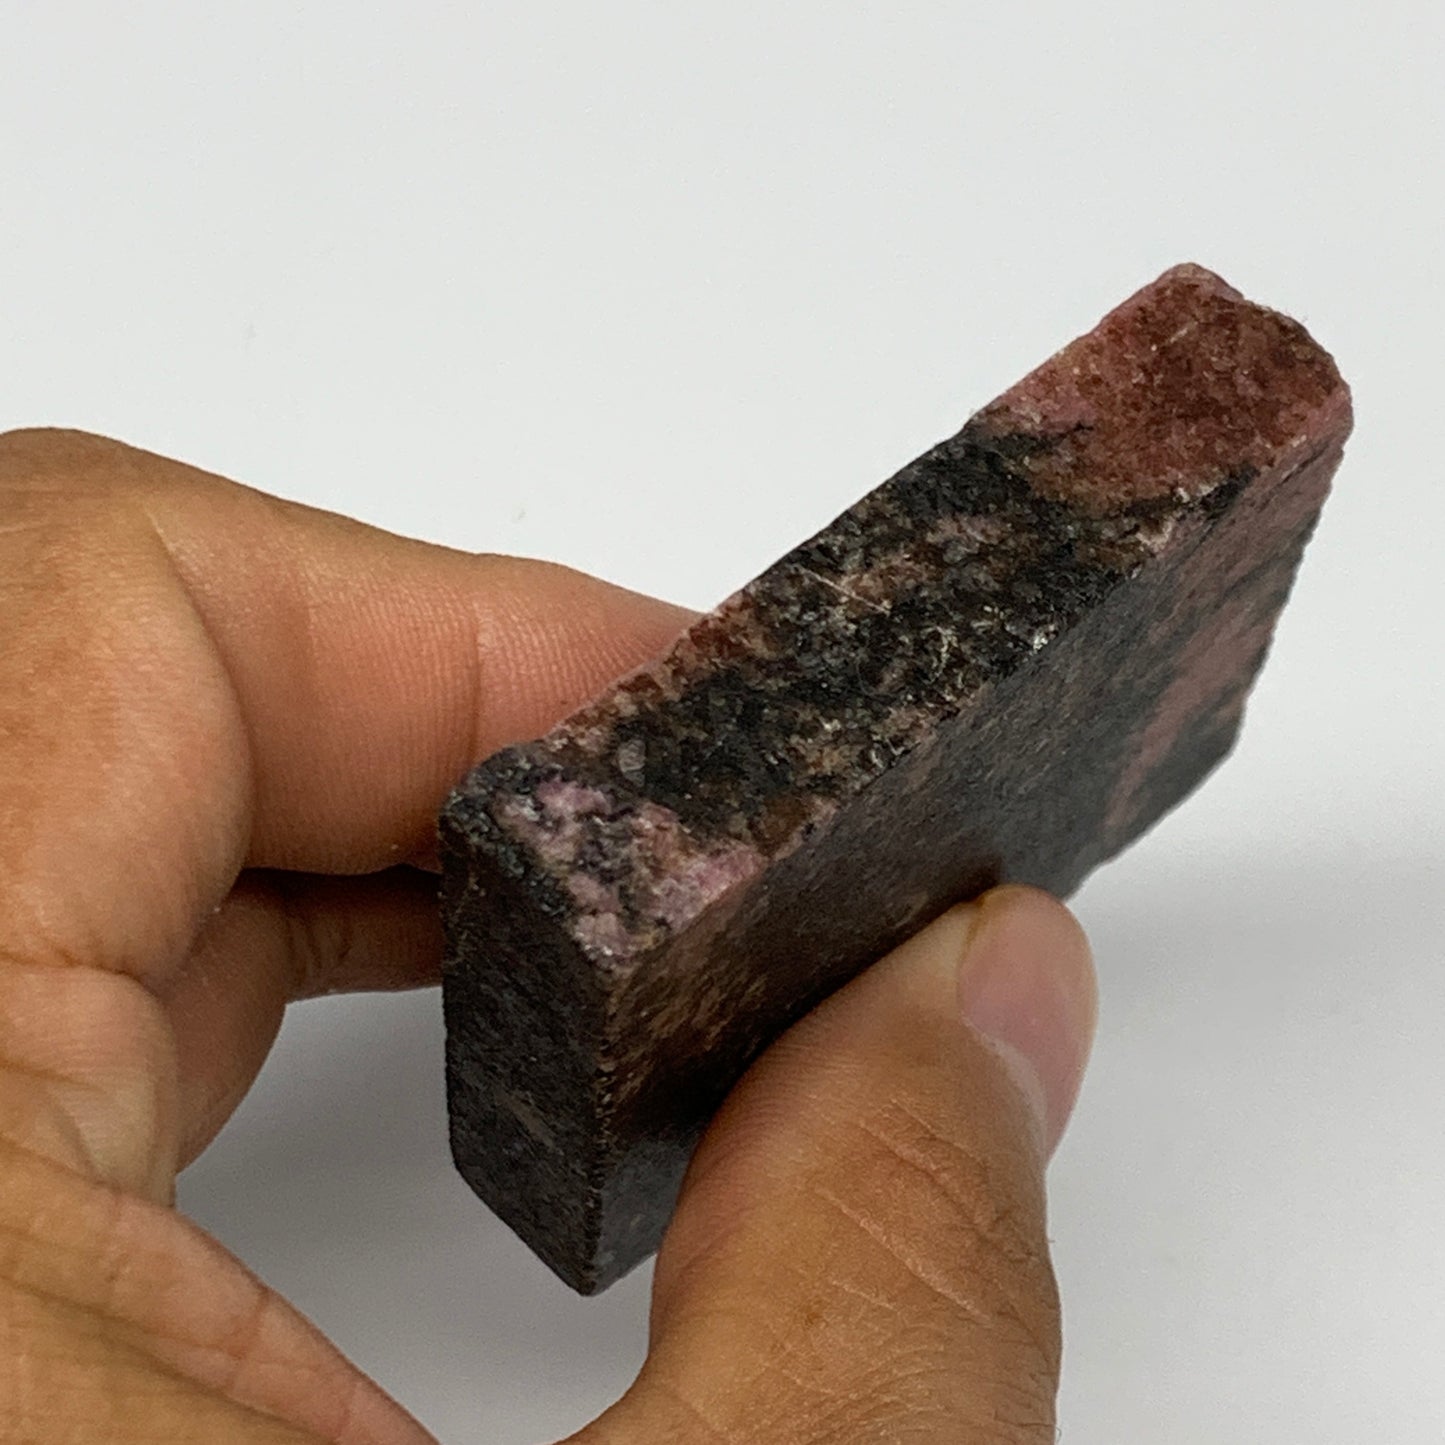 97.7g, 2"x2"x0.5", One face polished Rhodonite, One face semi polished, B16012